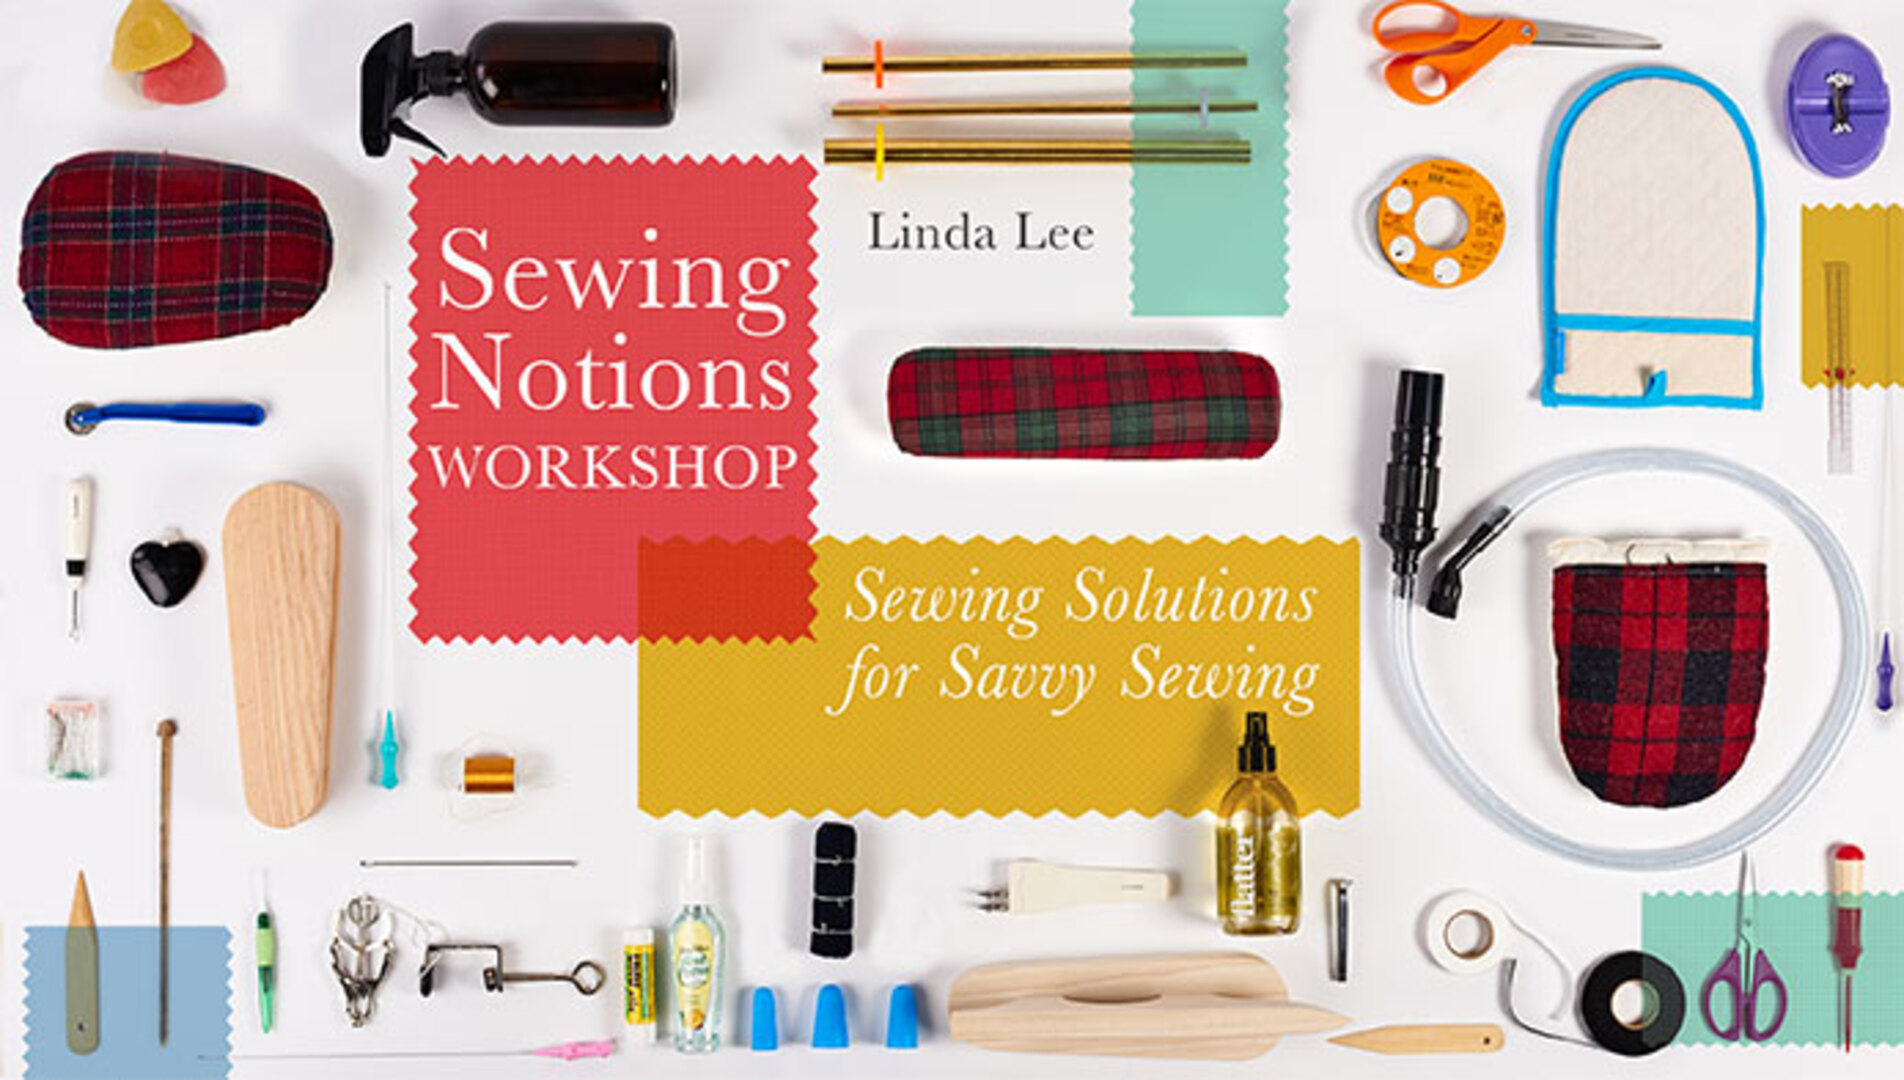 Sewing Tools and Notions Flashcards